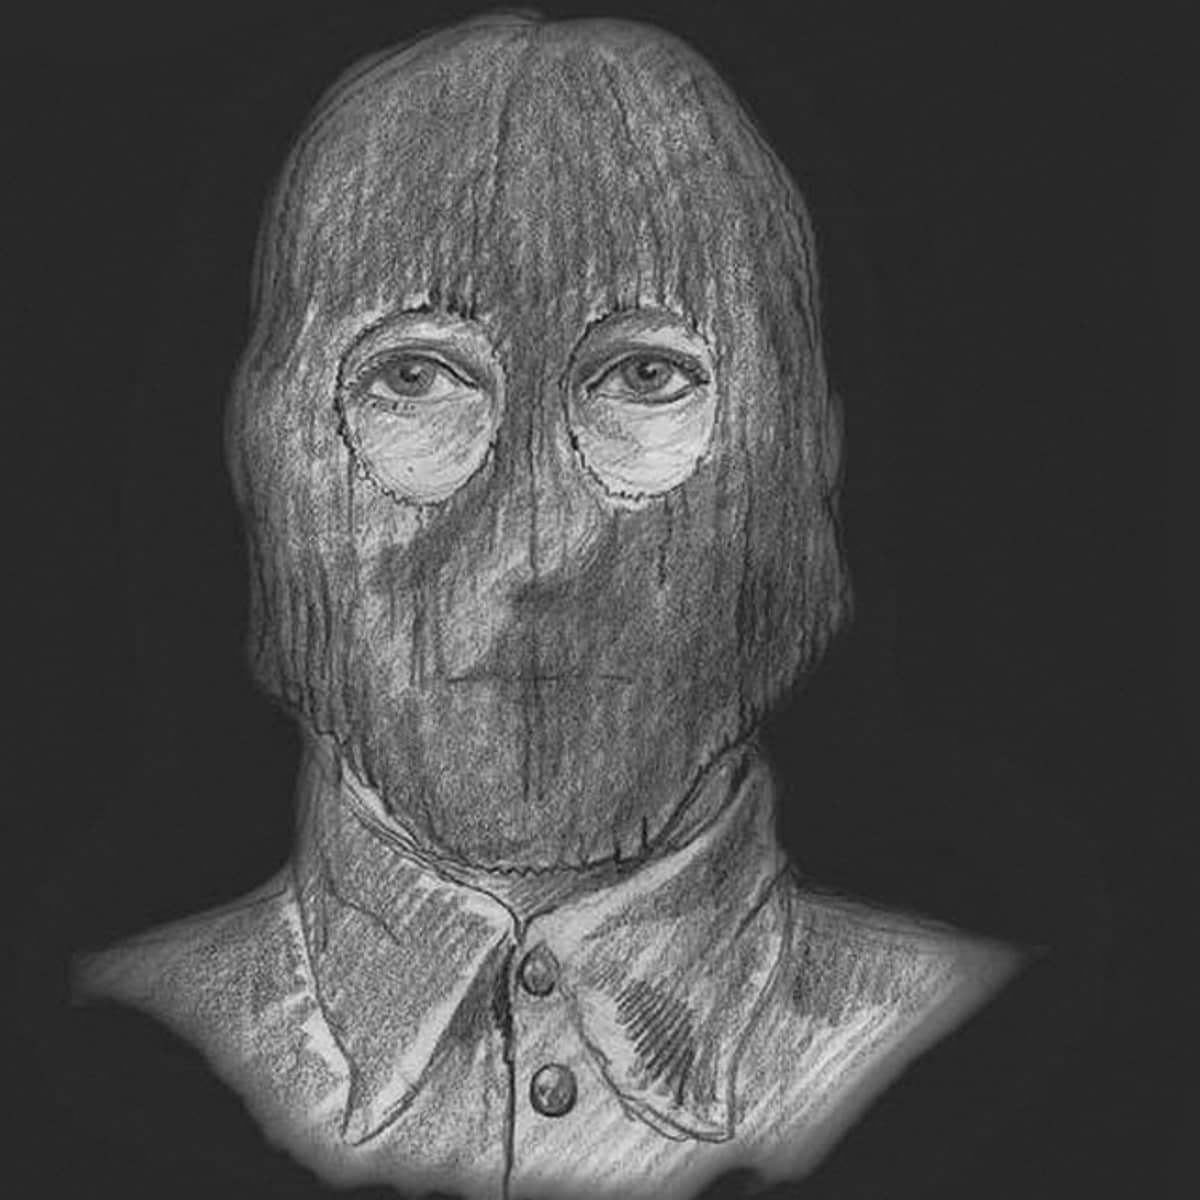 Golden State Killer In the Footsteps of a Killer by Michelle McNamara - LAmag photo